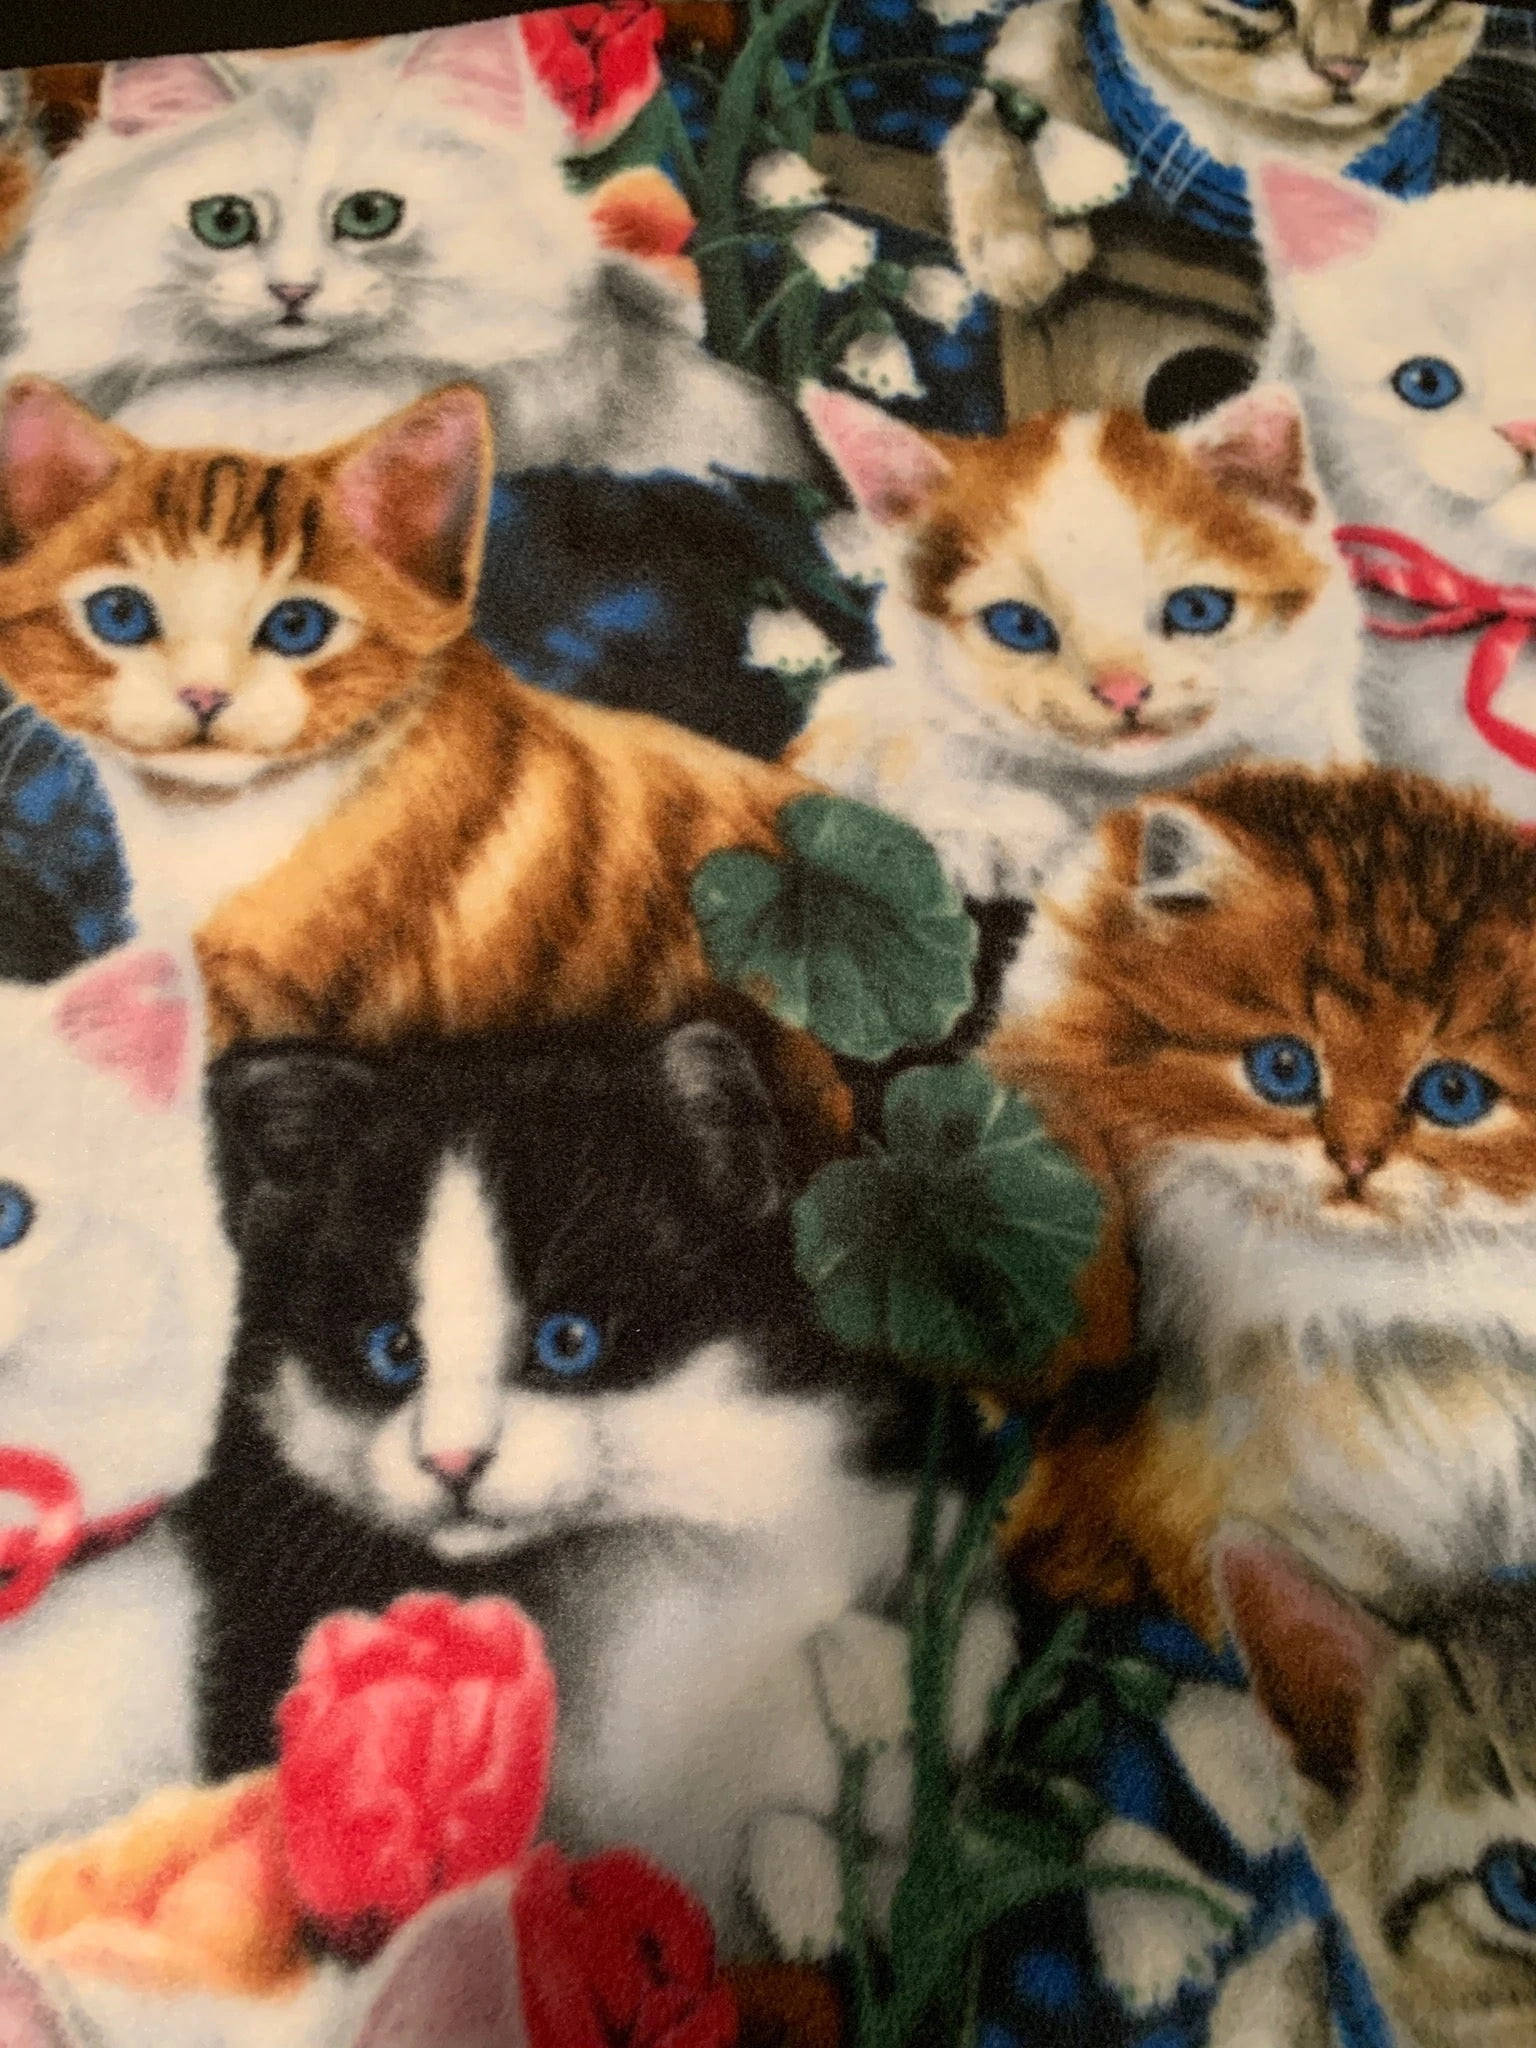 Valentine's Kittens Cats Animals Bows Flowers Roses Fleece Fabric Print A334.20 